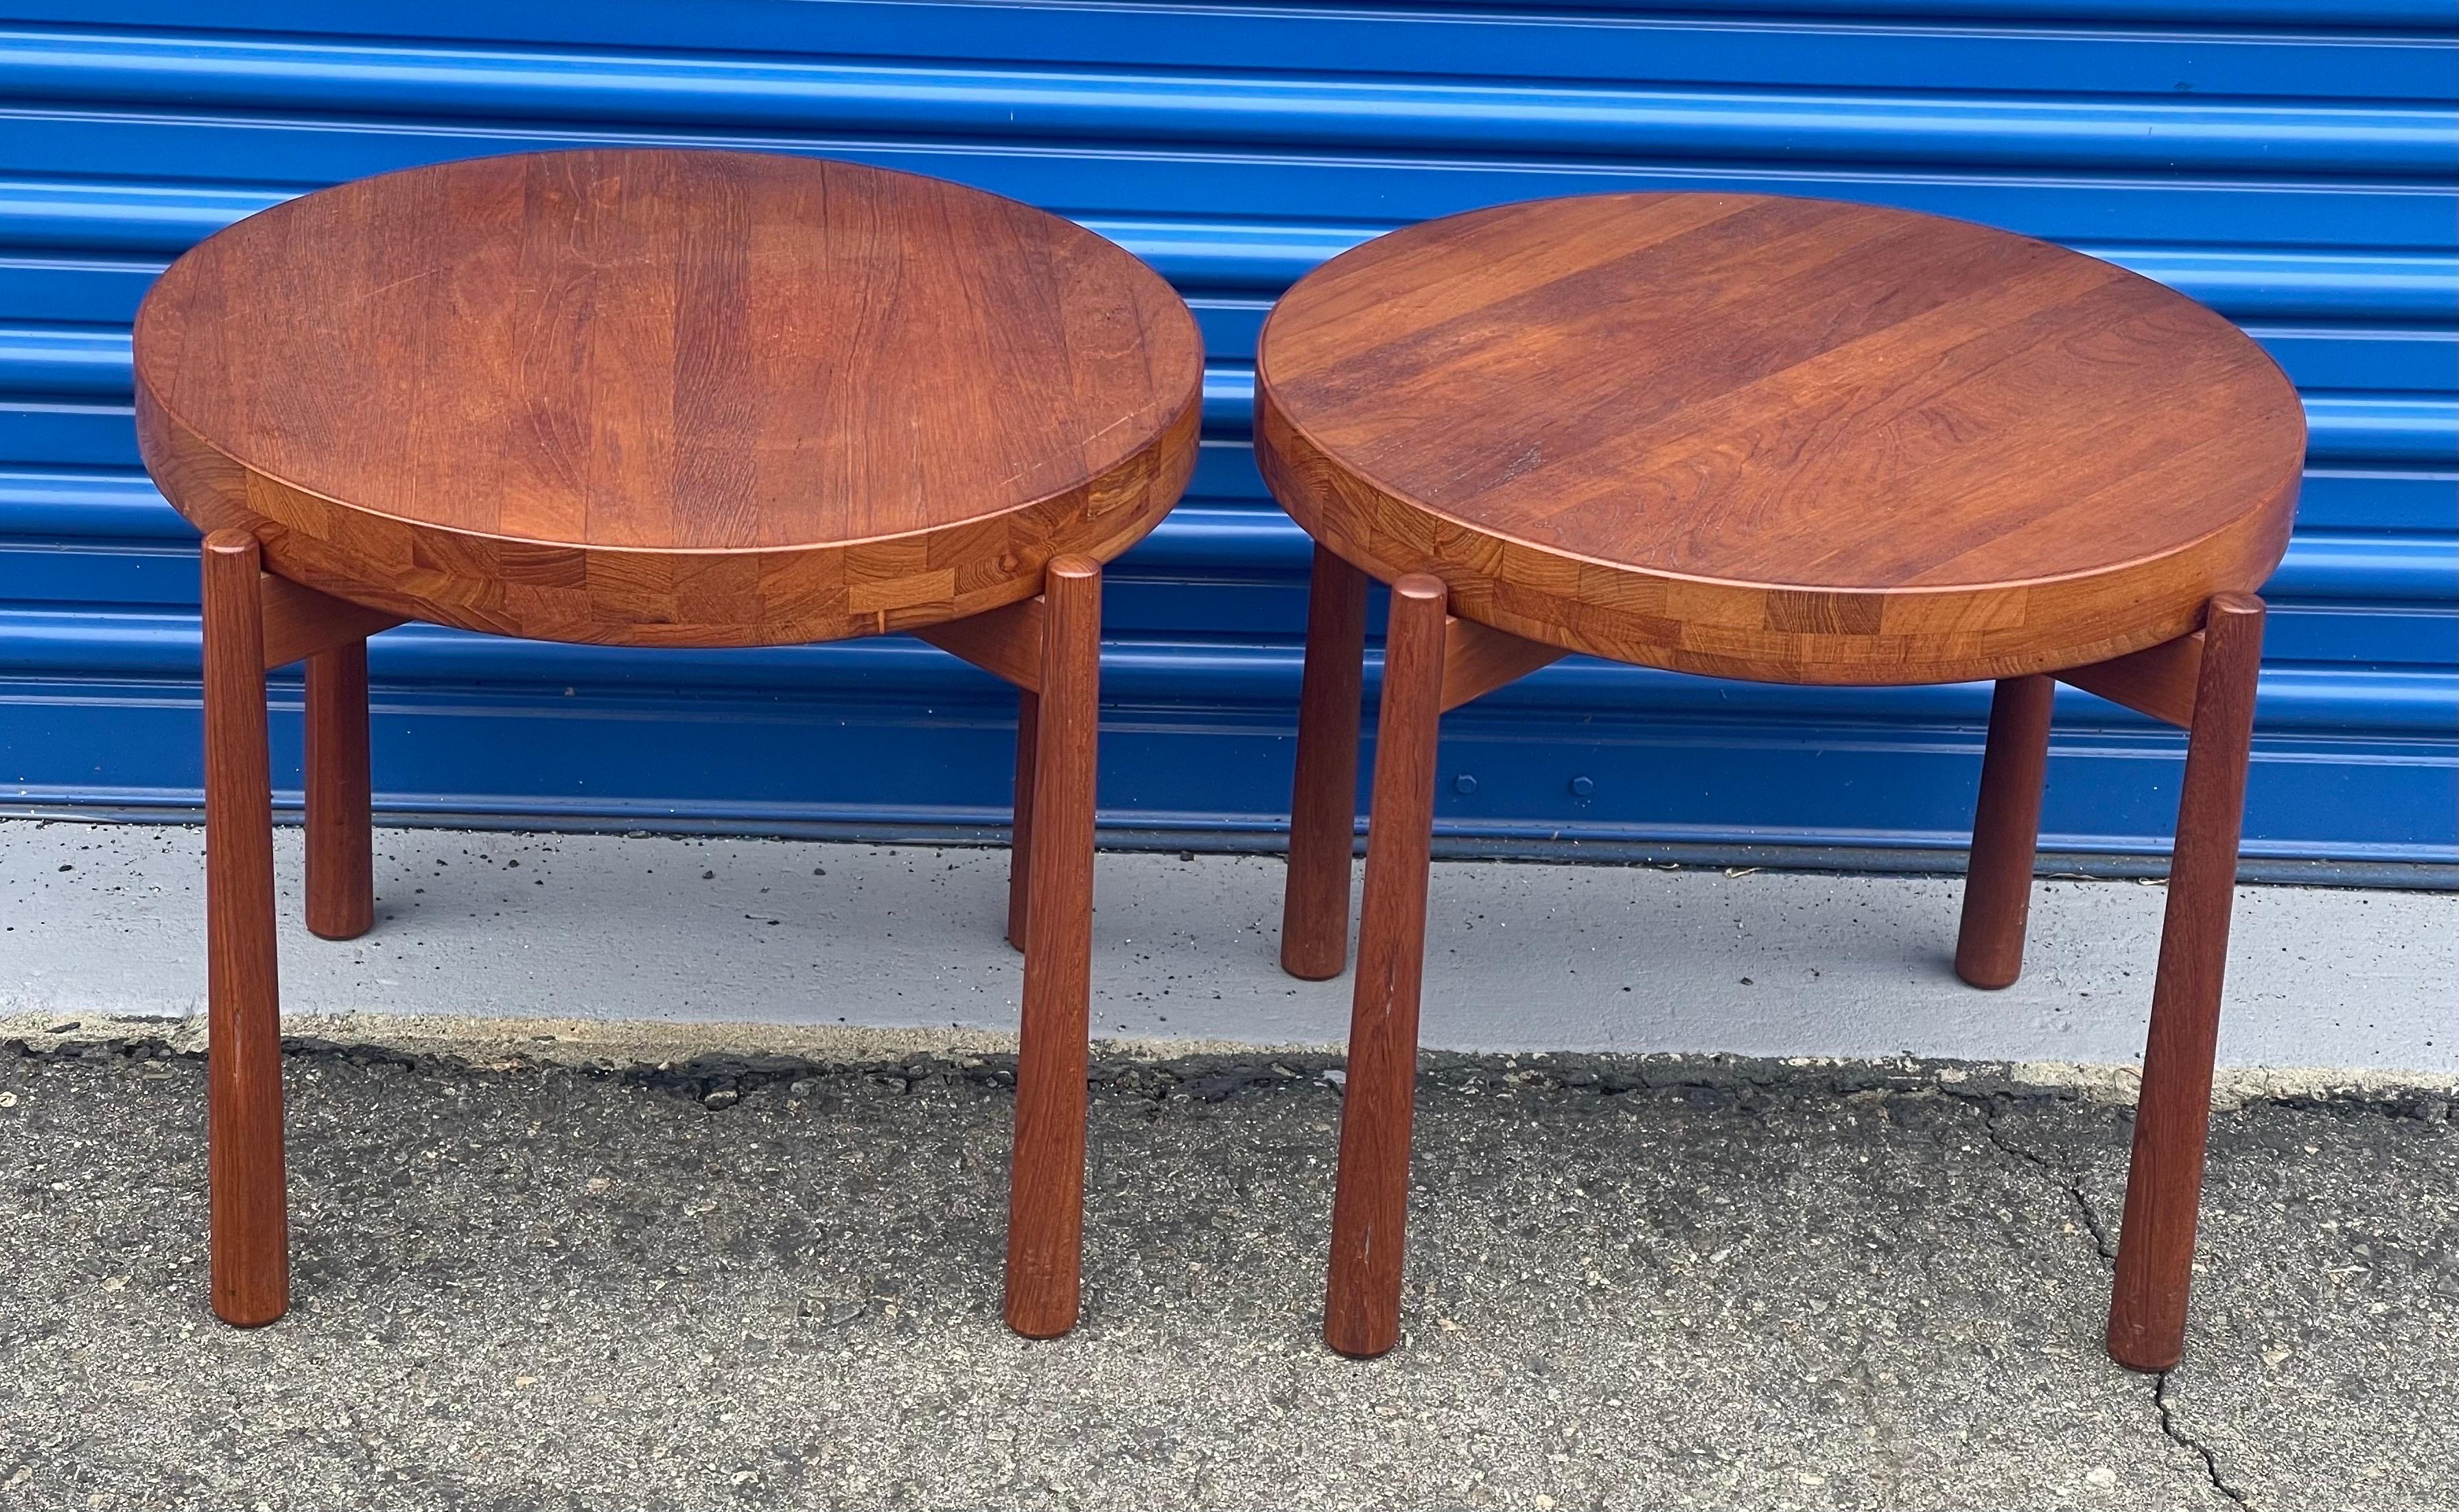 Pair of Teak Tray Side Tables Attributed to Jens Quistgaard for DUX of Sweden For Sale 5